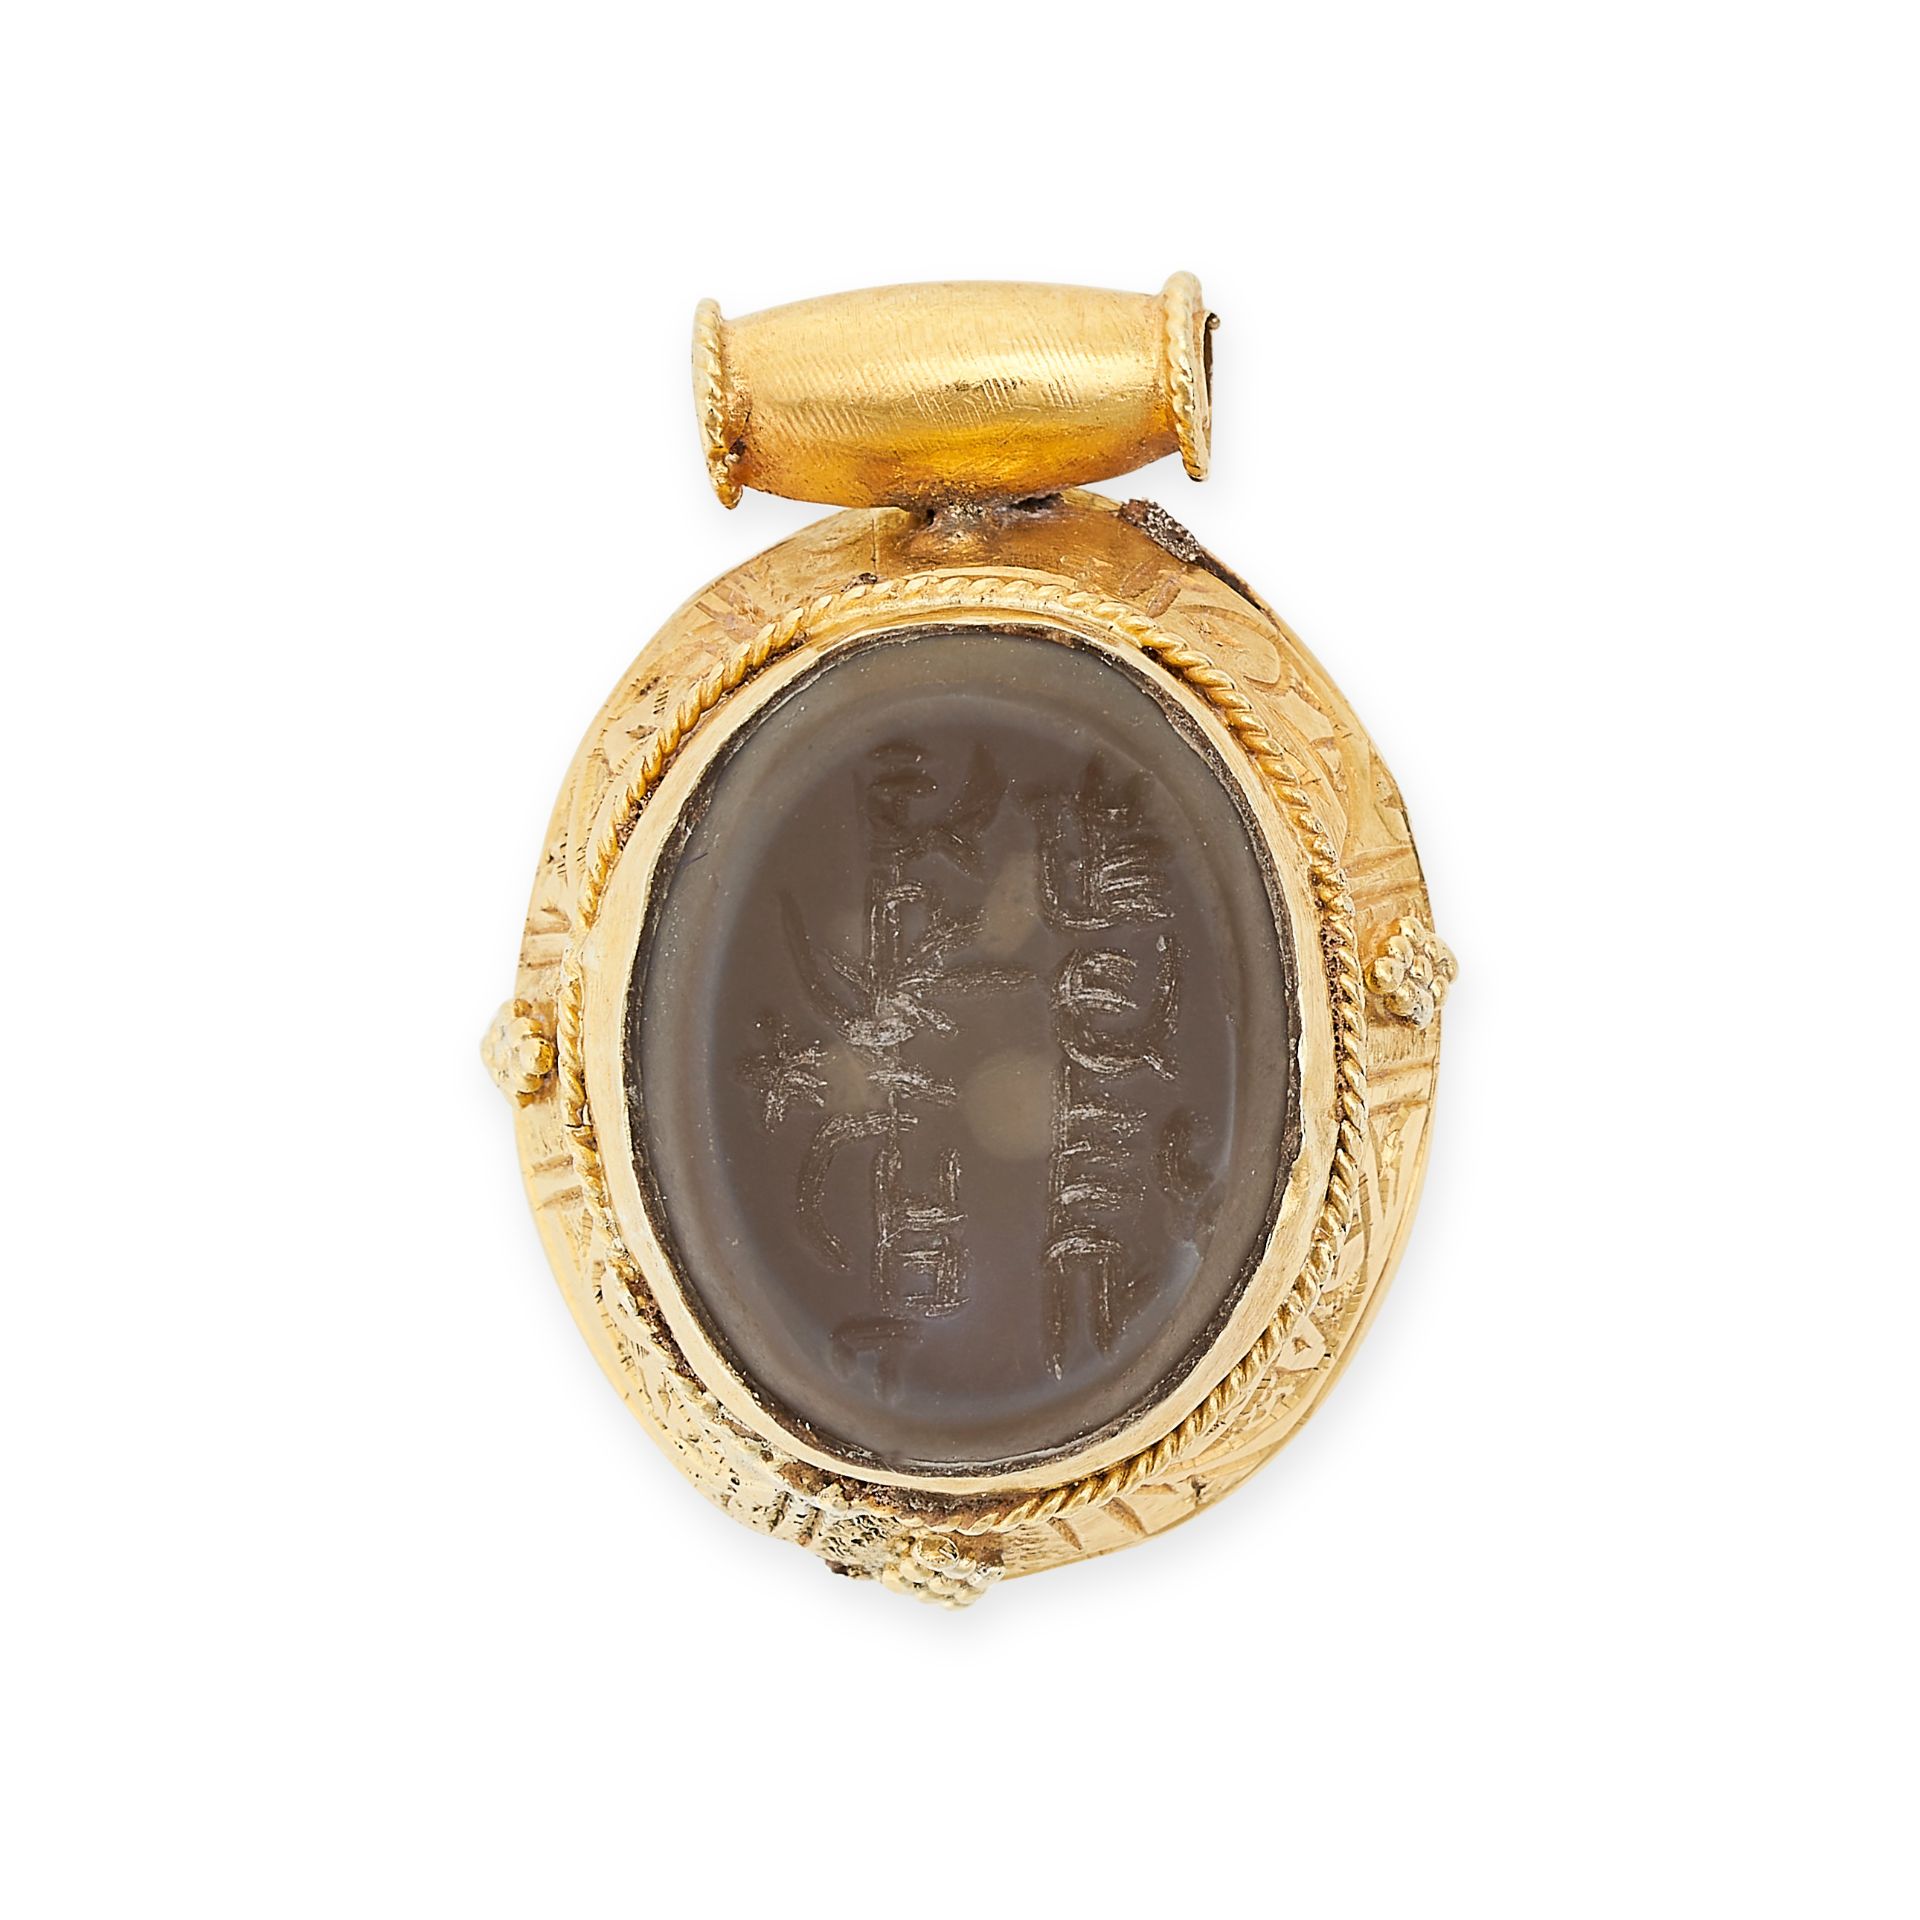 A HARDSTONE SEAL PENDANT set with an oval hardstone intalgio with engraved Arabic script, within a